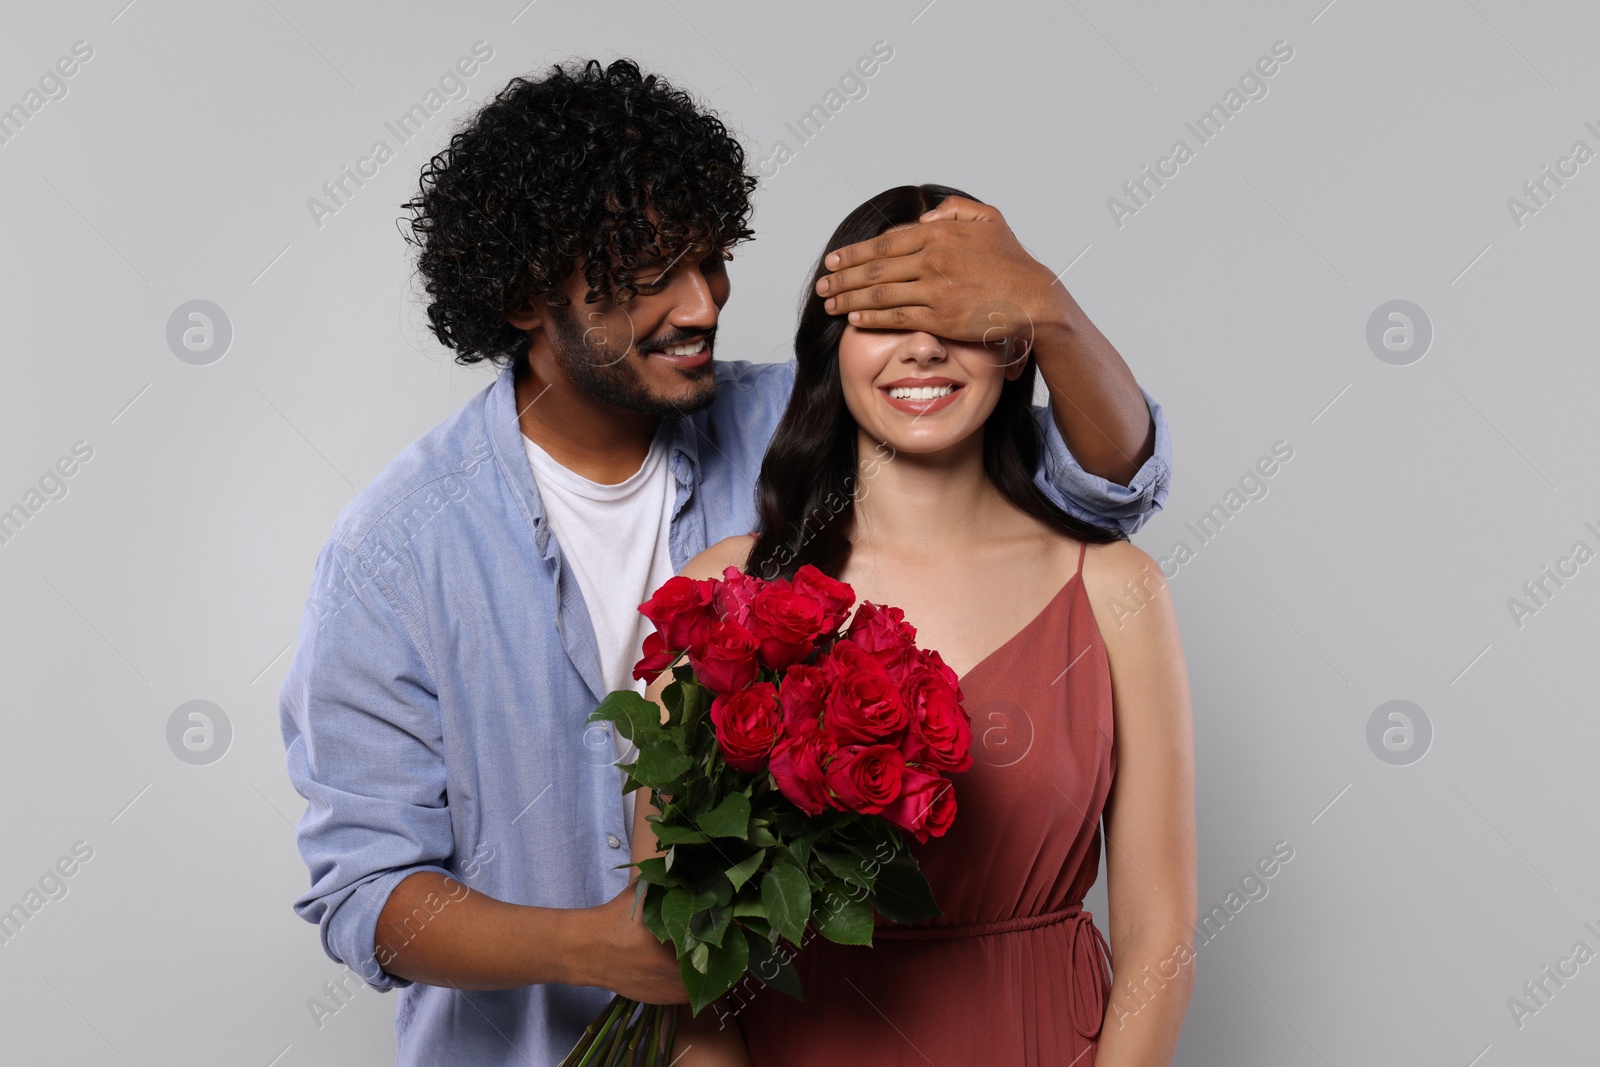 Photo of International dating. Handsome man presenting roses to his beloved woman on light grey background